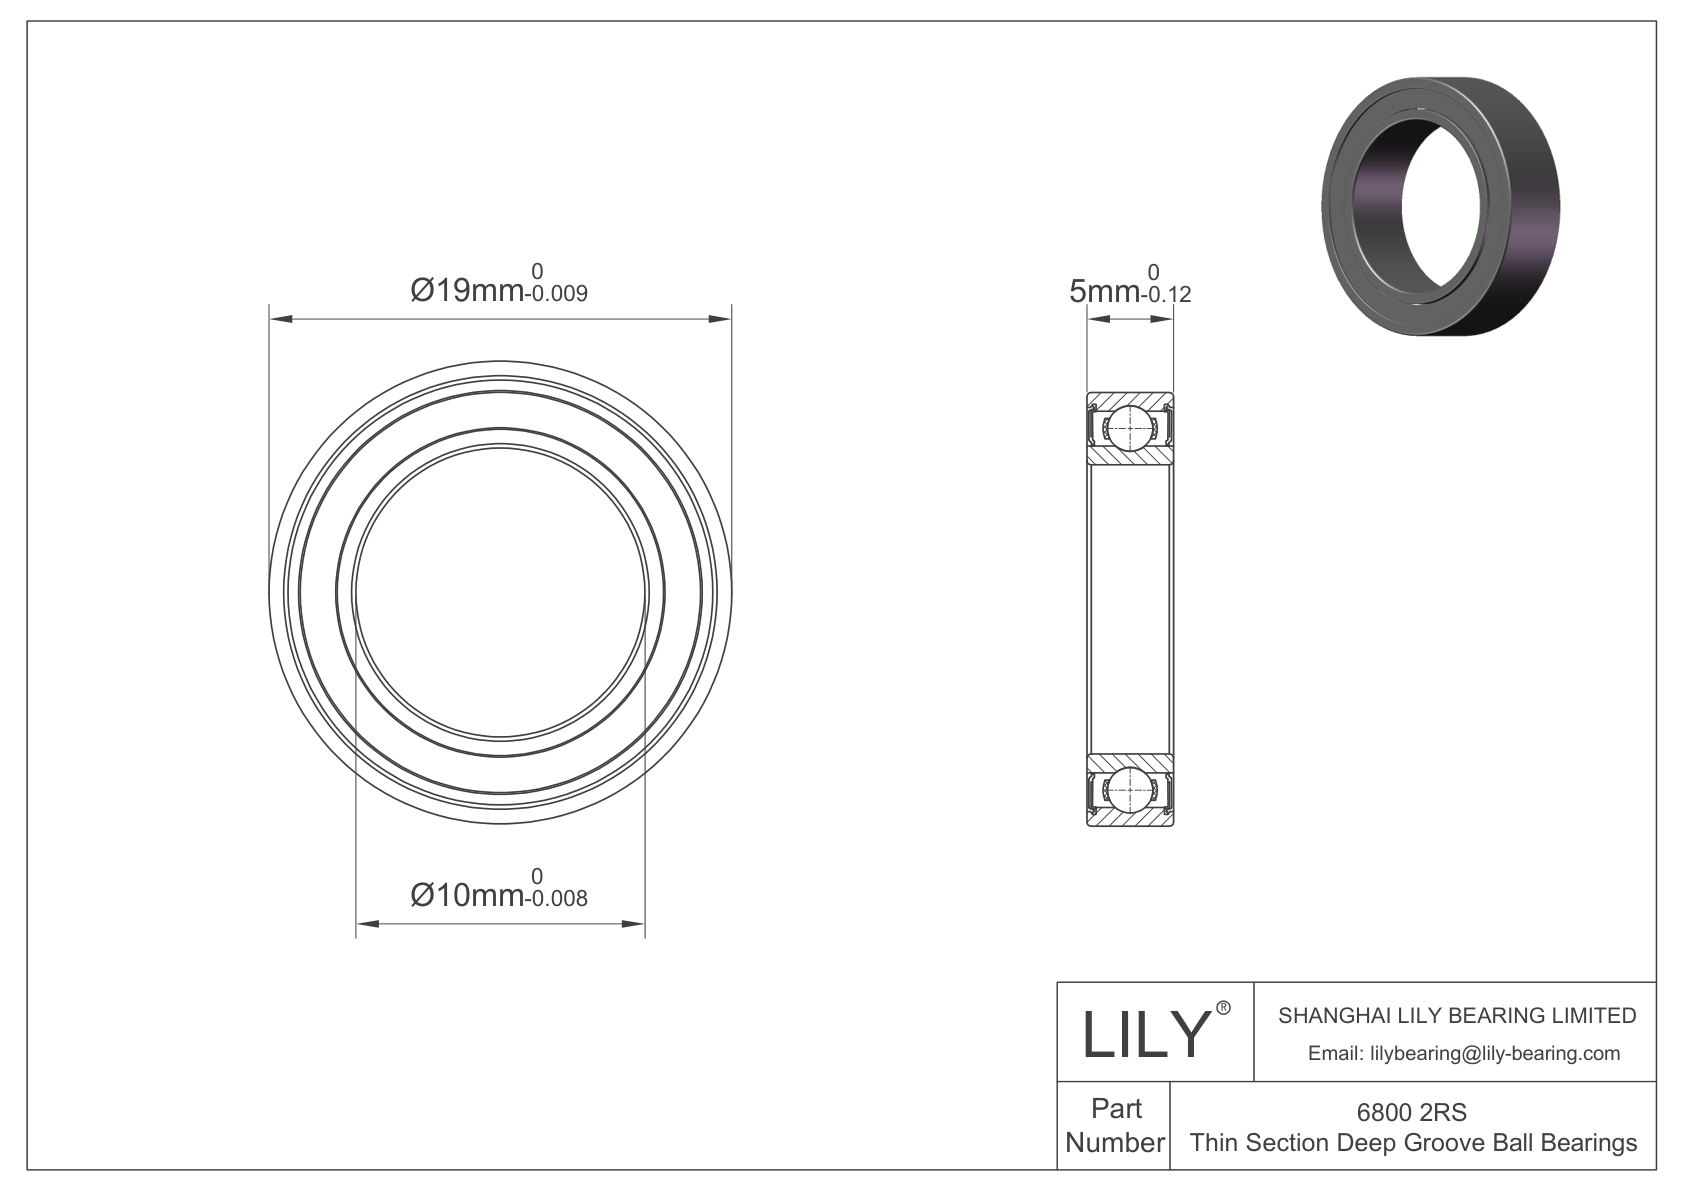 LILY-PUT680035-45 Outsourcing Polyurethane bearings cad drawing